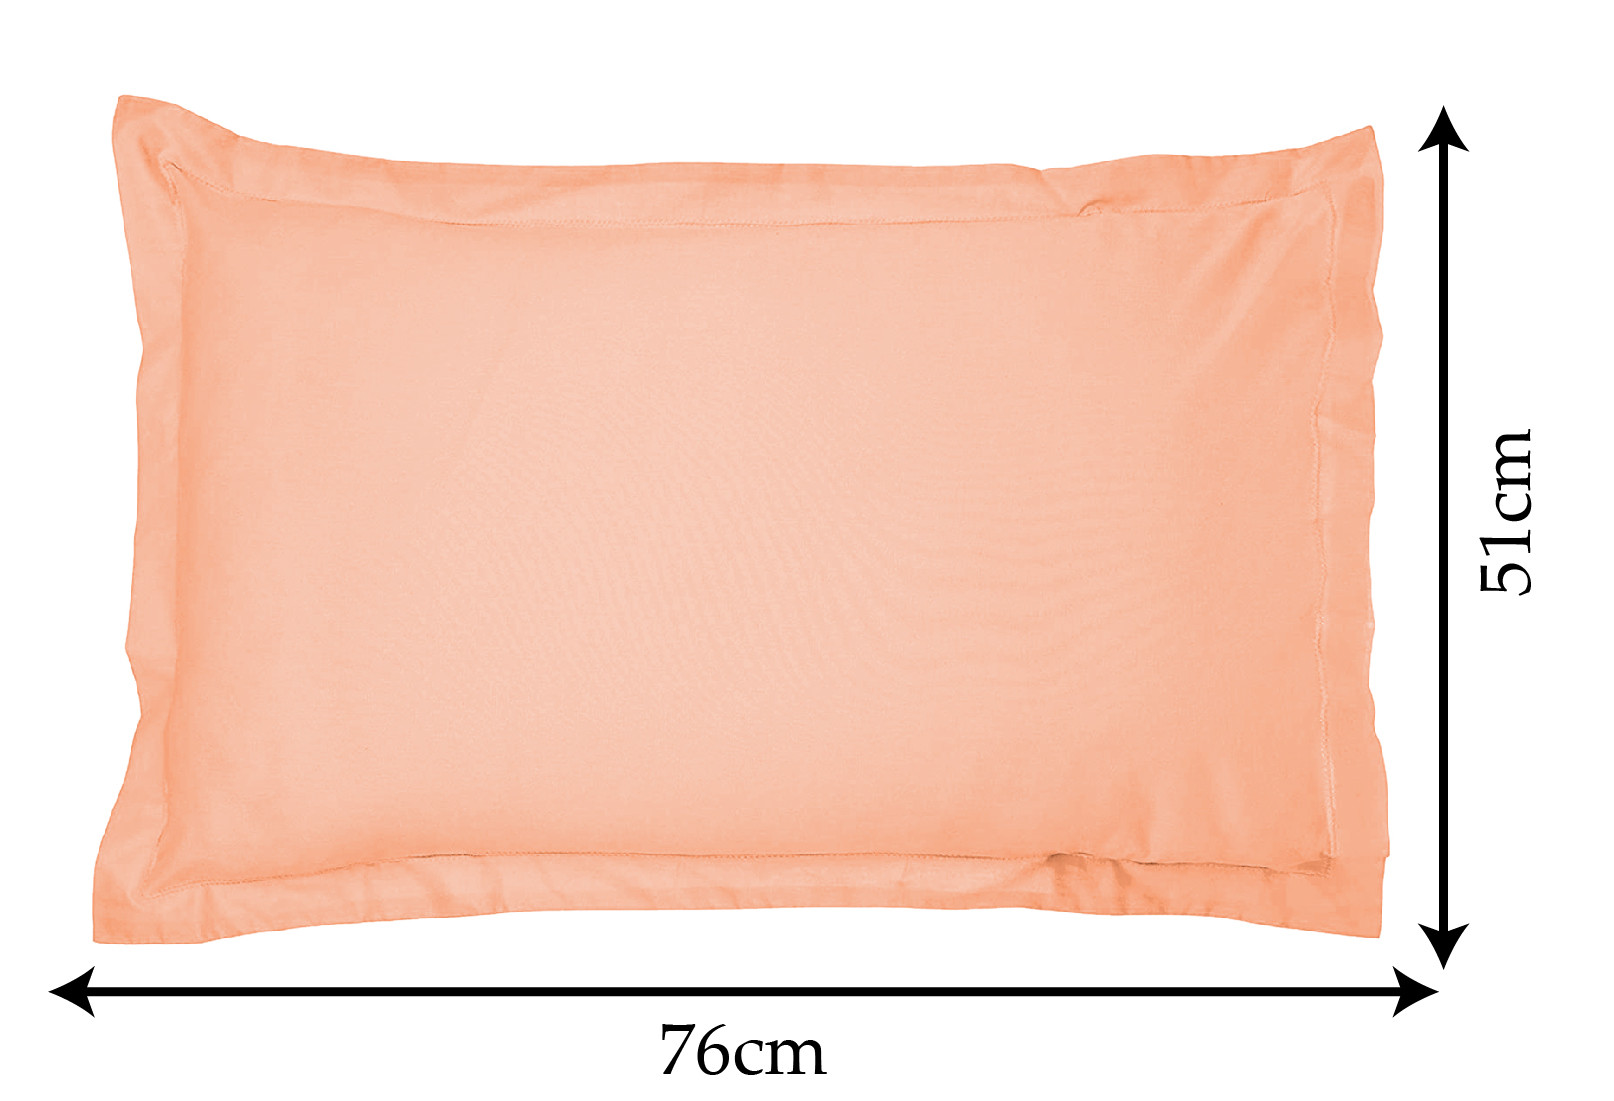 Kuber Industries Breathable & Soft Cotton Pillow Cover For Sofa, Couch, Bed - 29x20 Inch,(Peach)